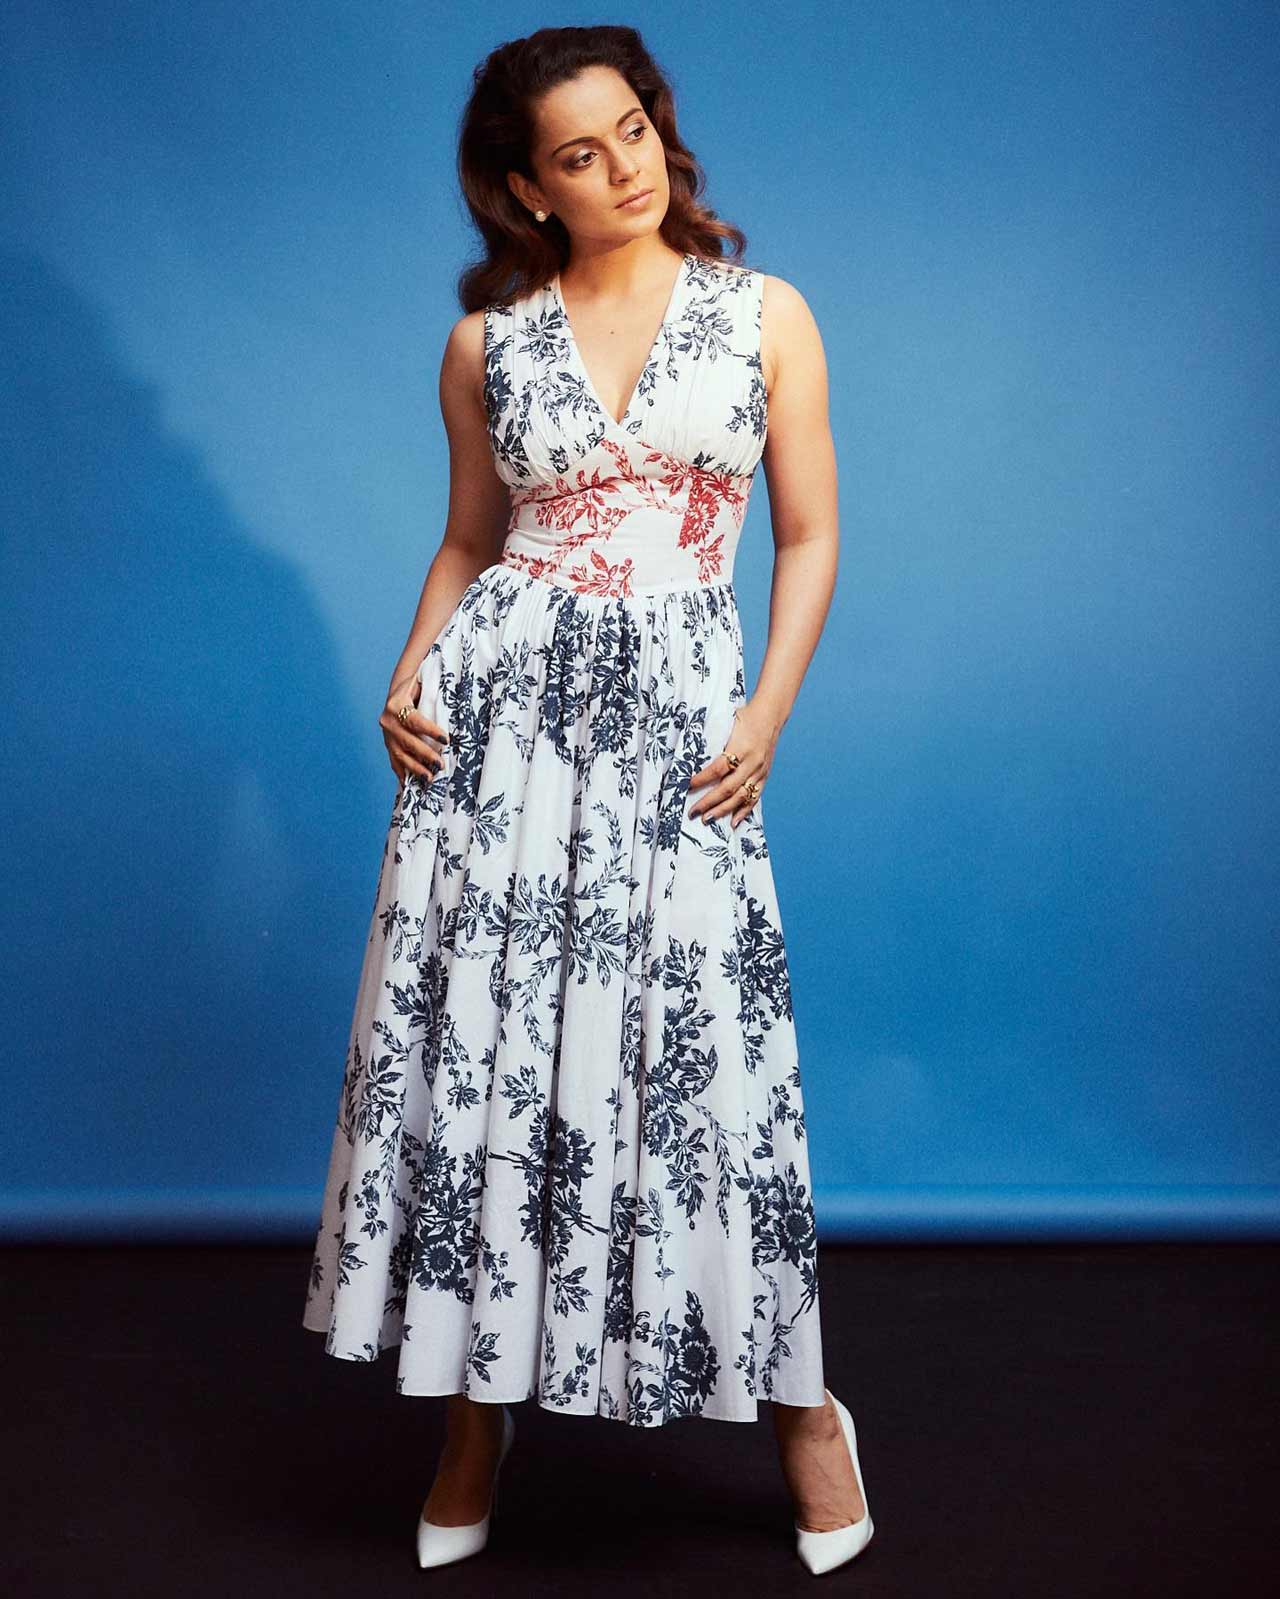 Floral can never go wrong and this flowy outfit picked by Kangana Ranaut and the team looks like a perfect summer outfit. The actress looks like a vision in white in this one, what do you think?